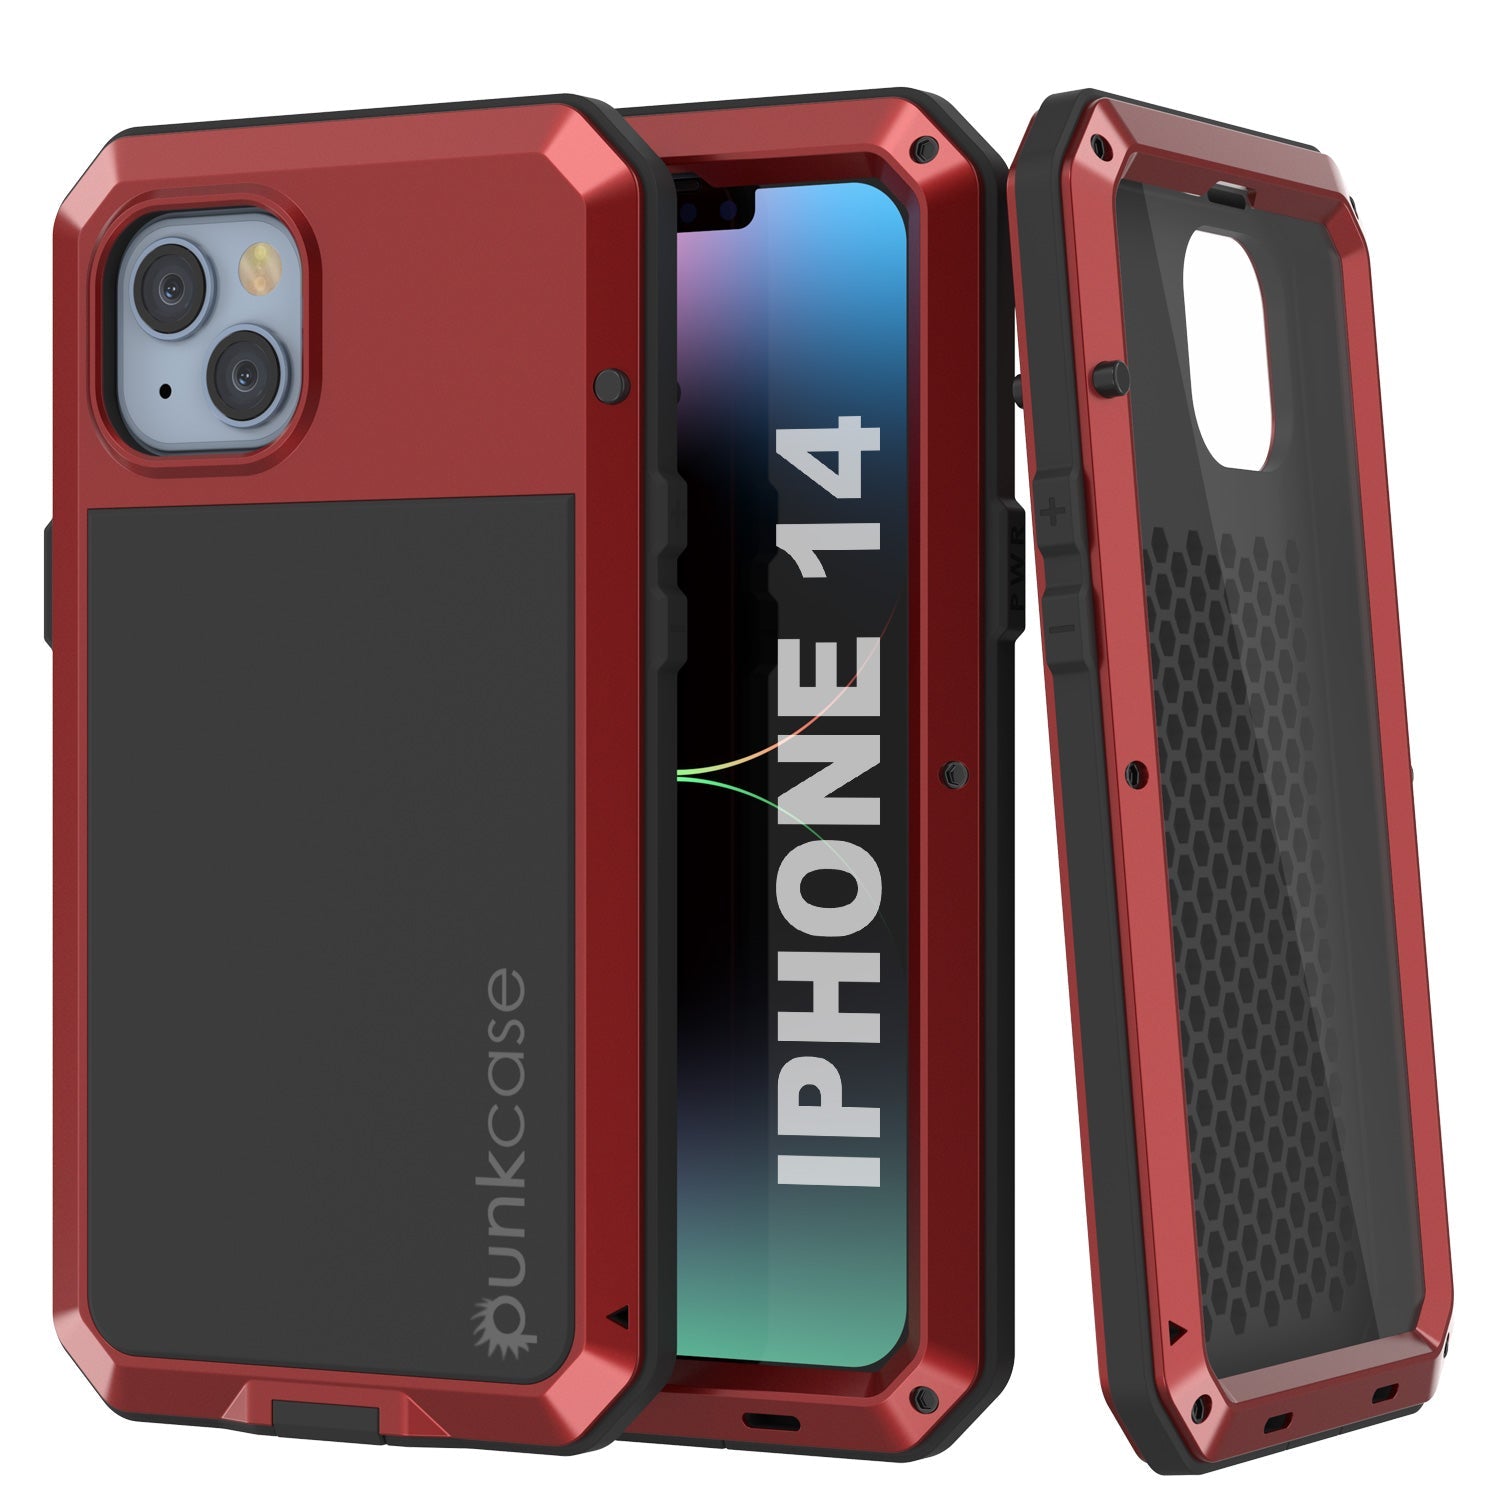 iPhone 14 Metal Case, Heavy Duty Military Grade Armor Cover [shock proof] Full Body Hard [Red]